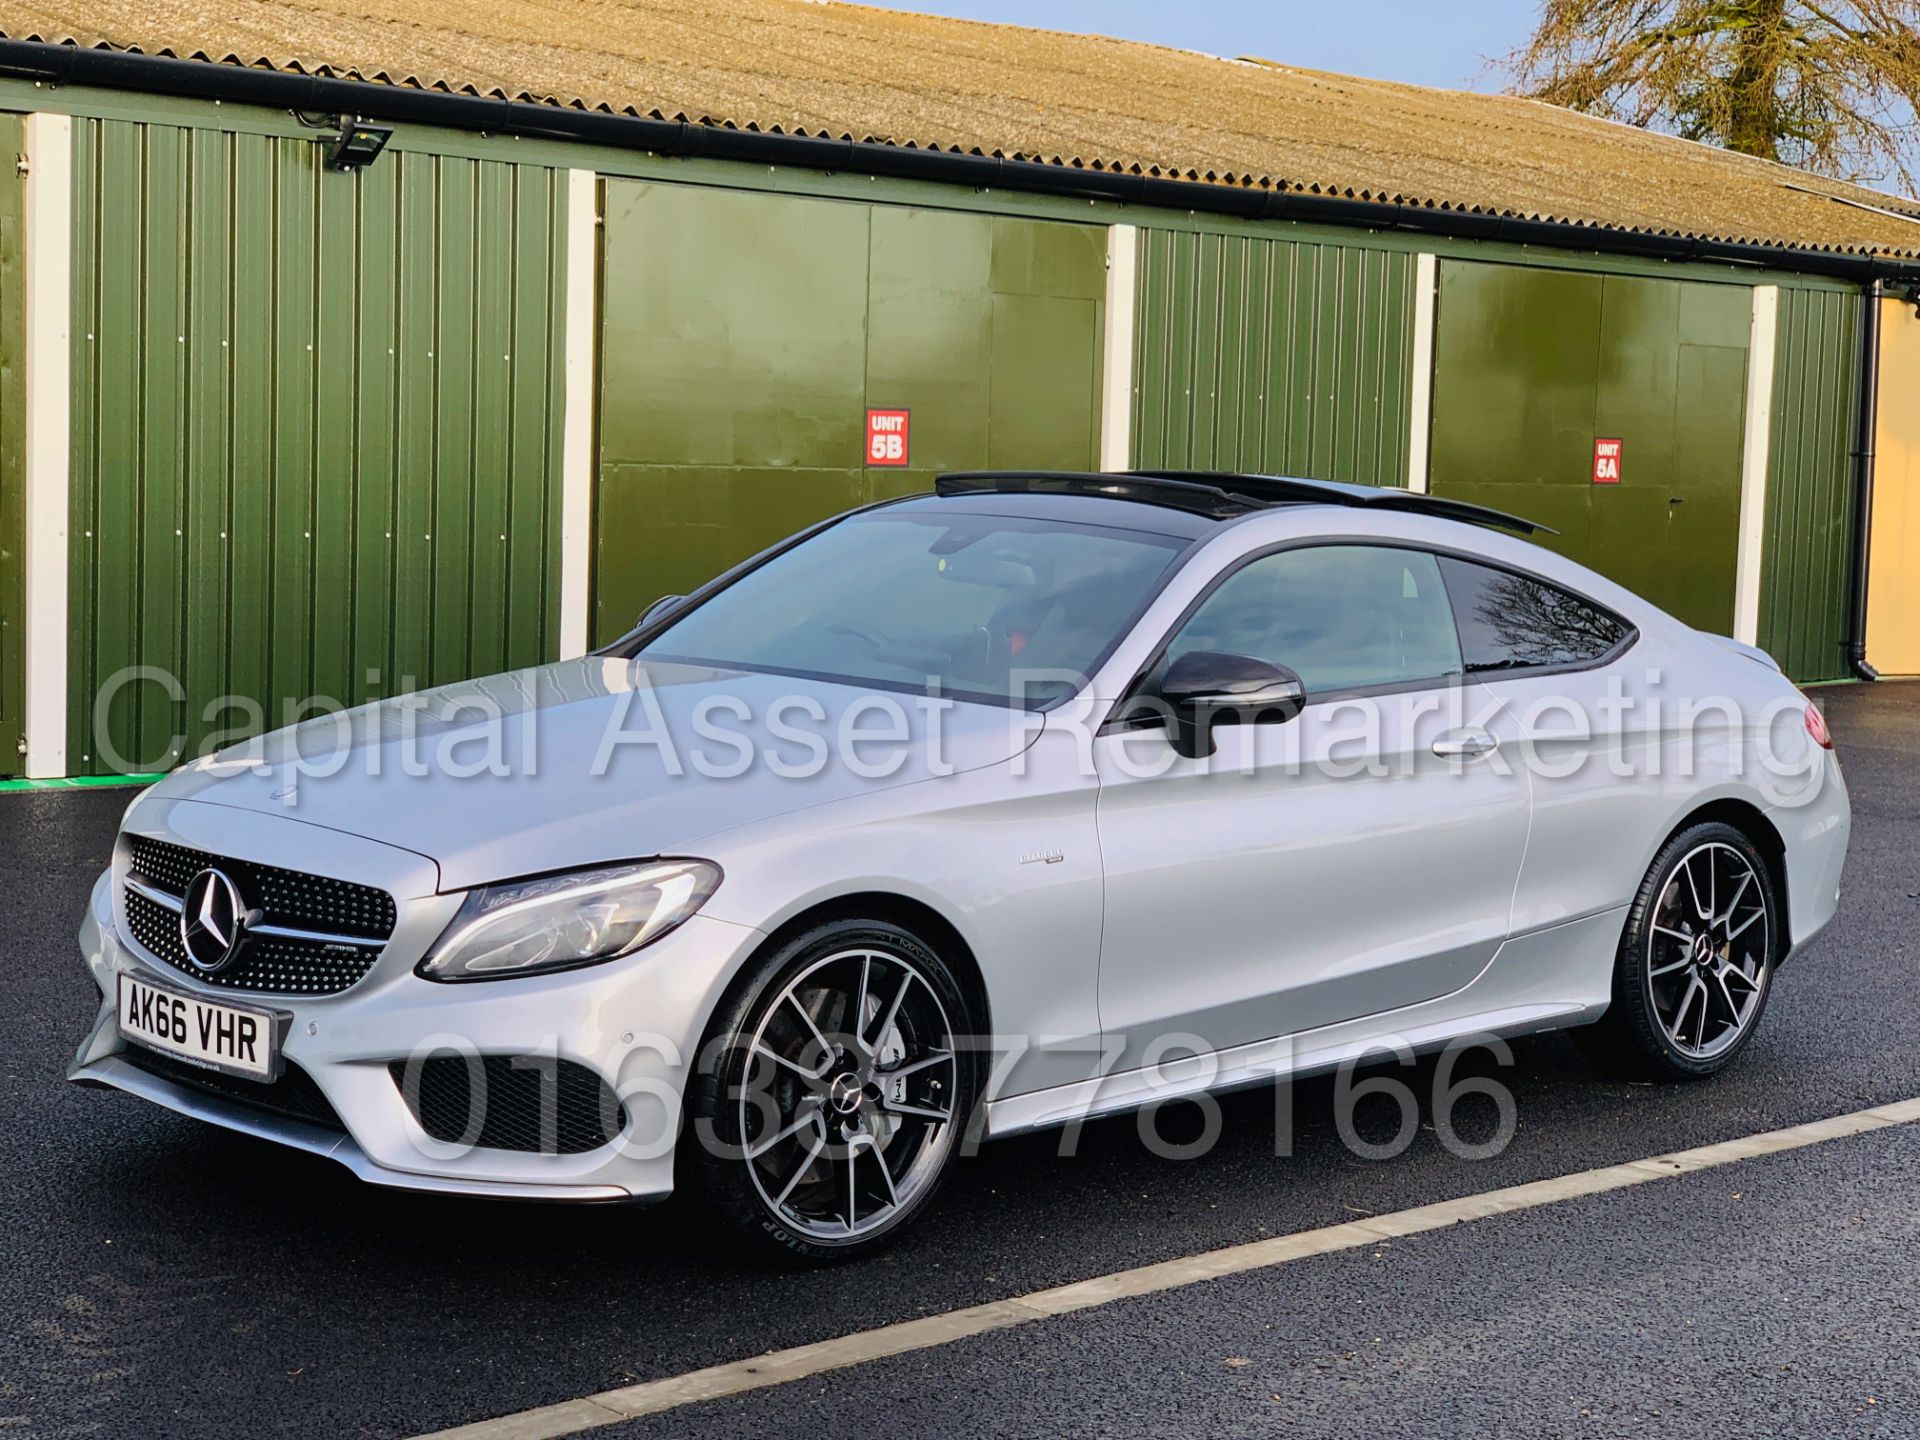 MERCEDES-BENZ C43 AMG *PREMIUM 4 MATIC* COUPE (2017) '9-G AUTO - LEATHER - SAT NAV' **FULLY LOADED**